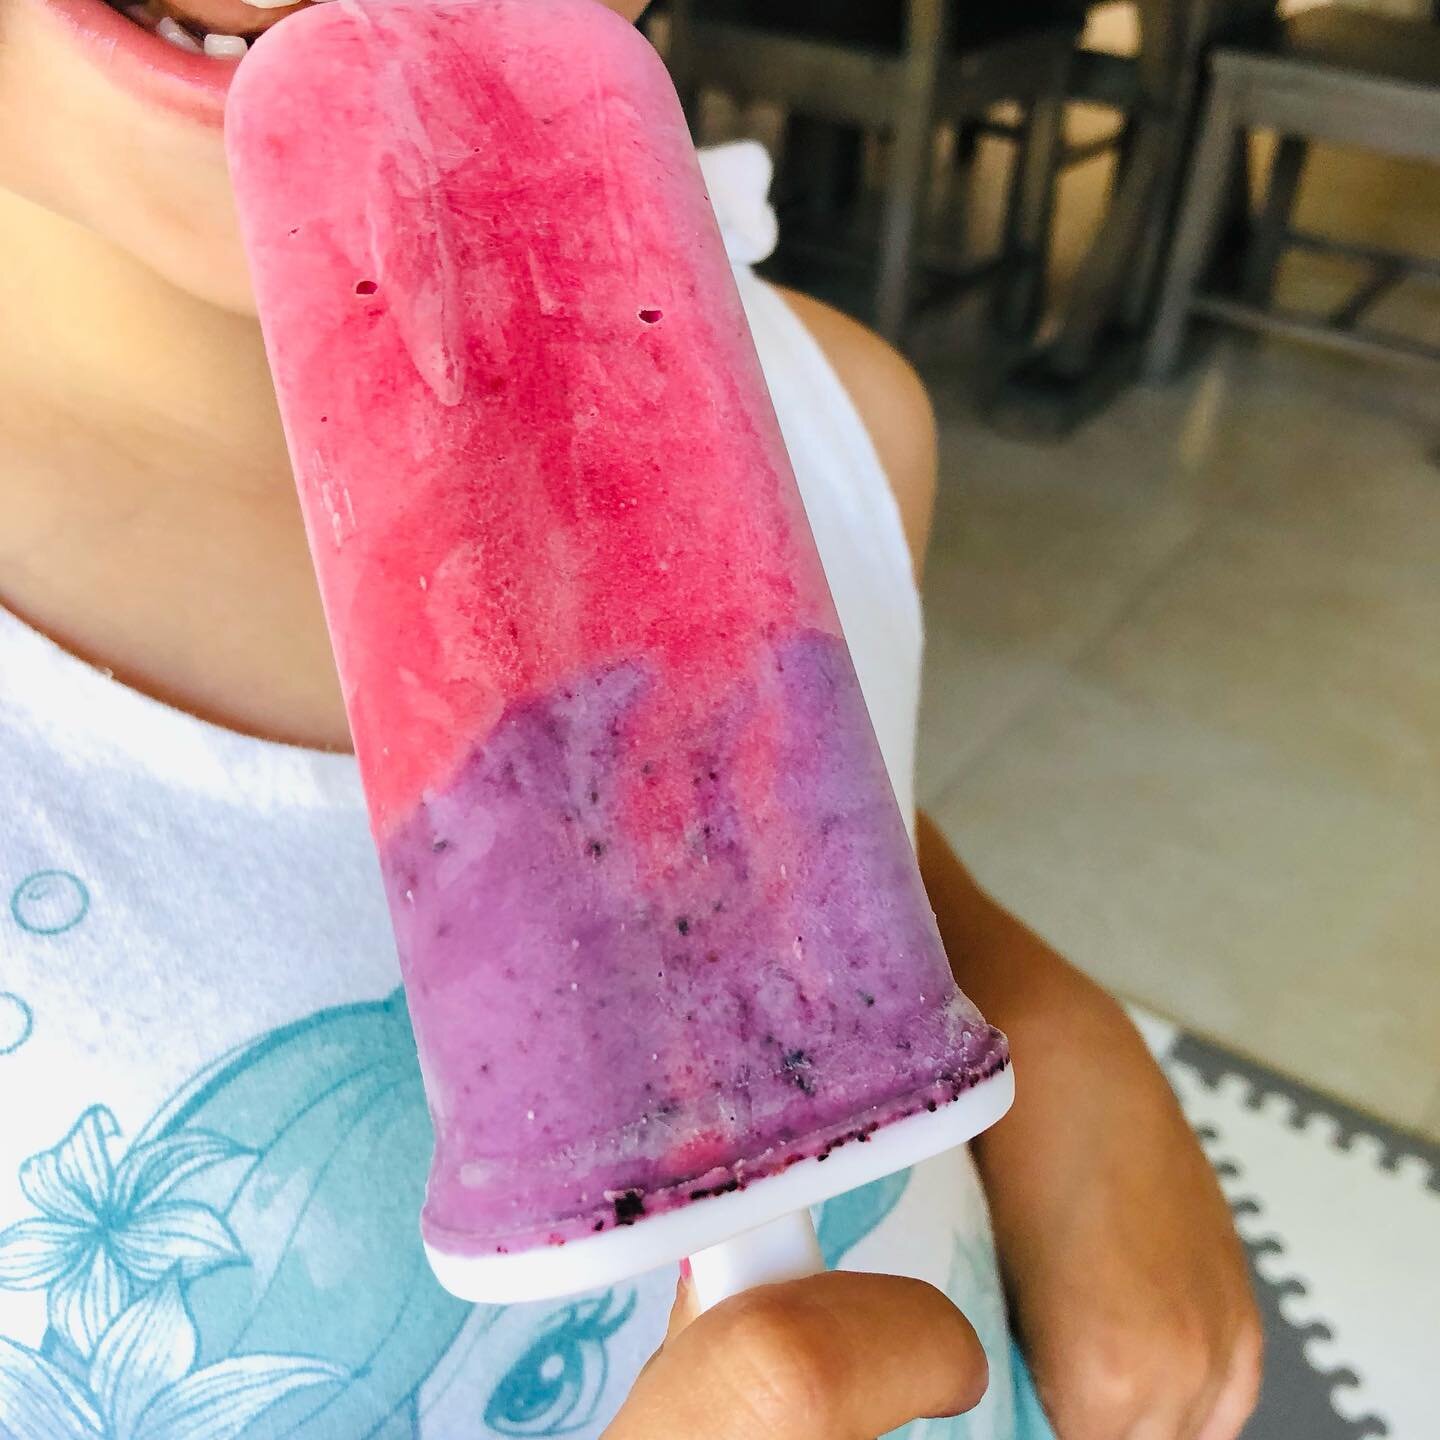 Berries and Cream Popsicles. So delicious and the colours are beautiful. Made with layers of raspberries and blueberries blended with vanilla yogurt and cream. The kids were excited to taste test these ones for me! 👍 all around!  #popsicletime #summ